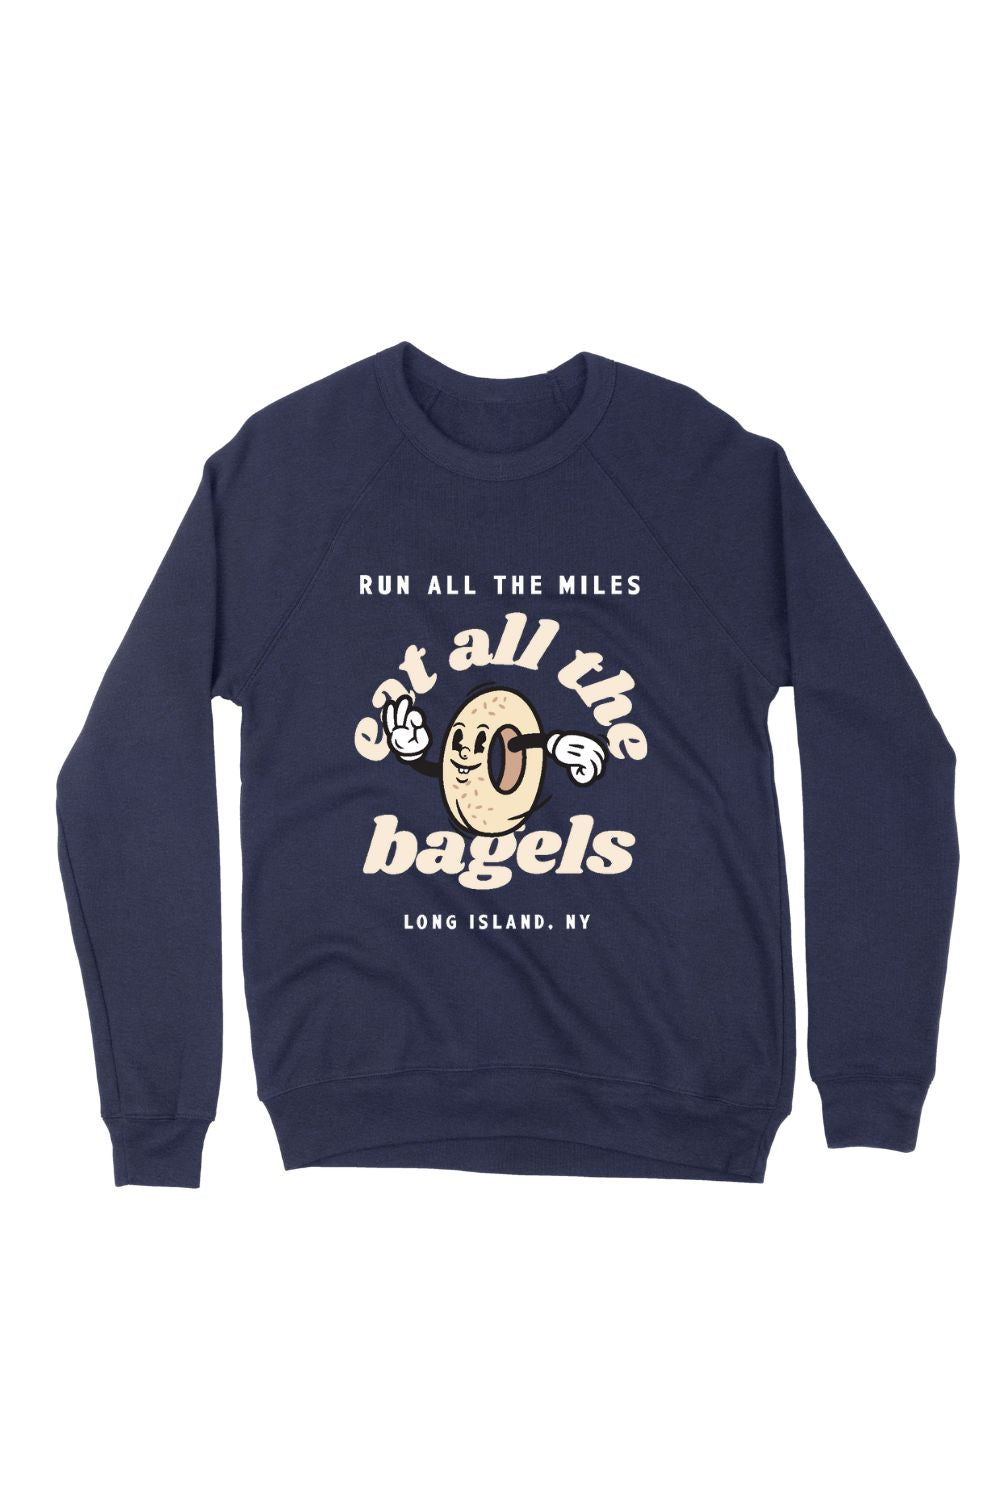 Run All The Miles, Eat All The Bagels Unisex Sweatshirt